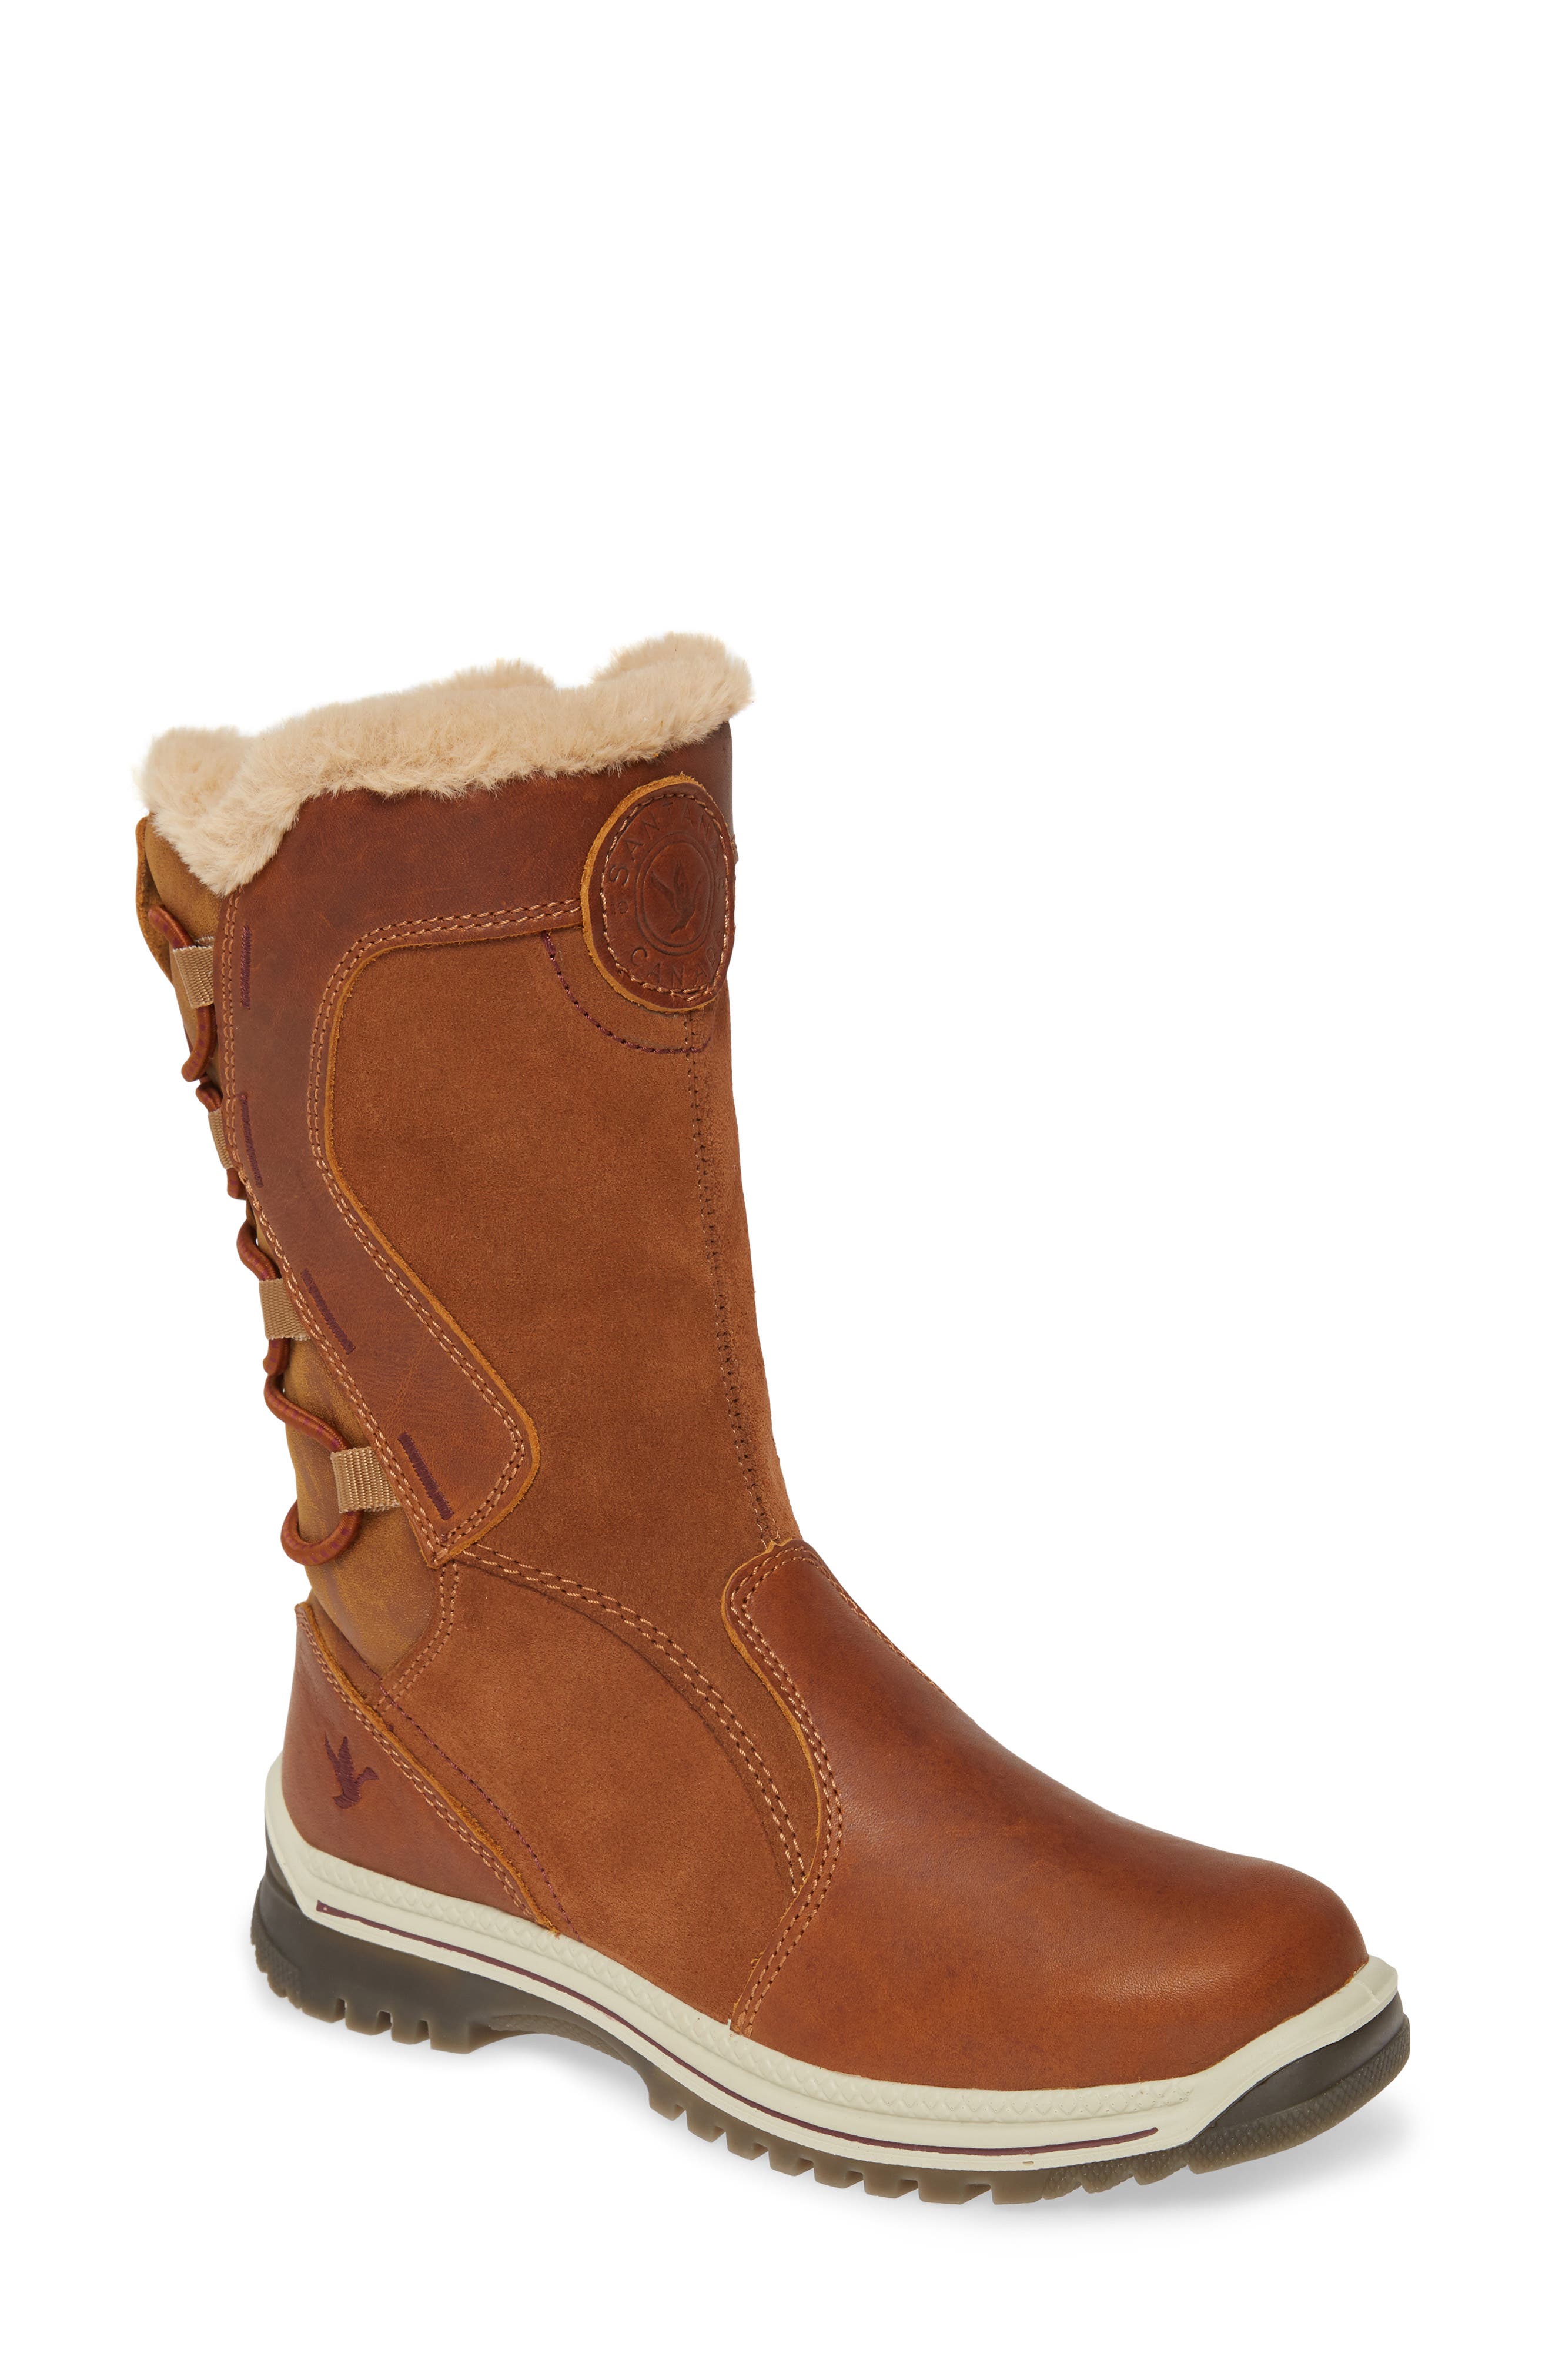 nordstrom boots canada